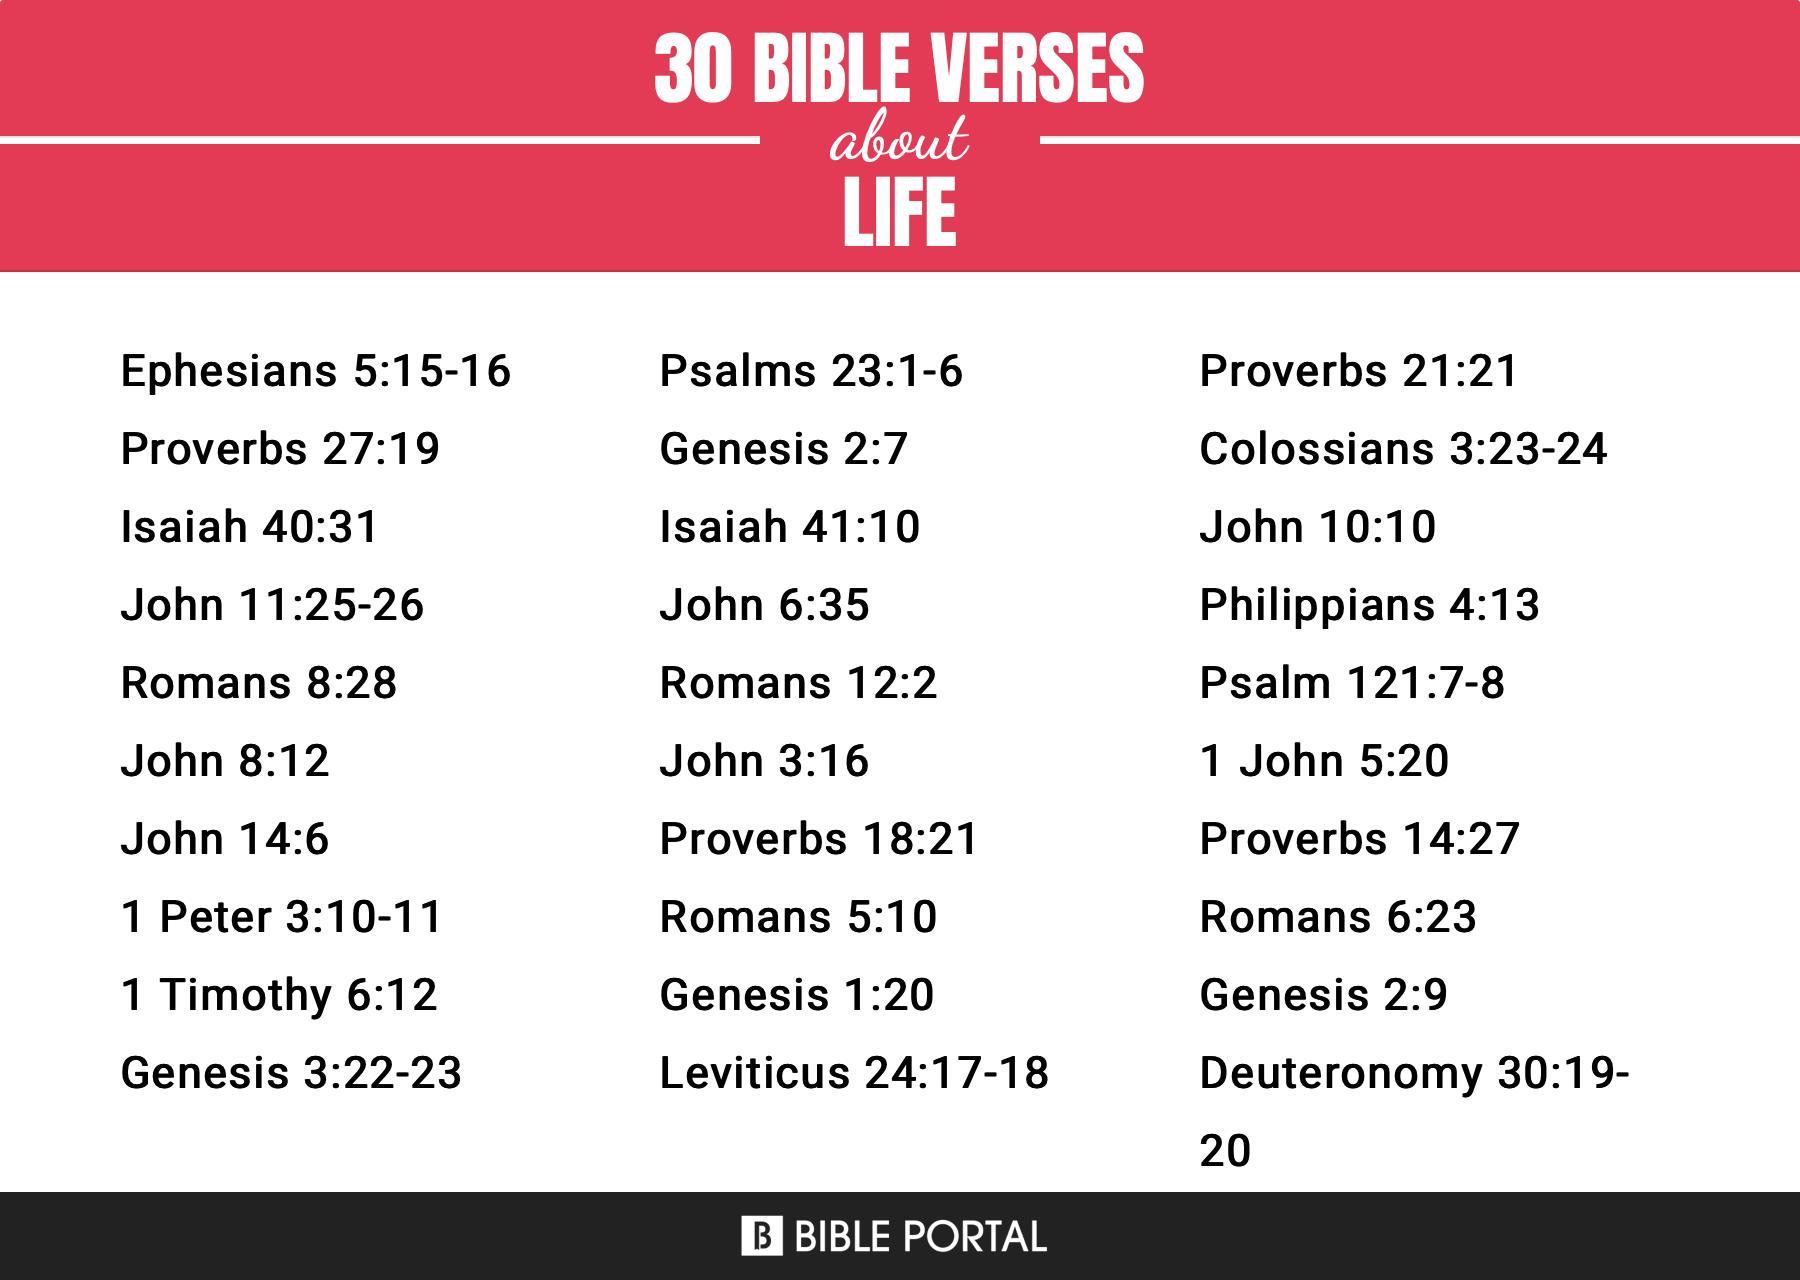 What Does the Bible Say about Life?